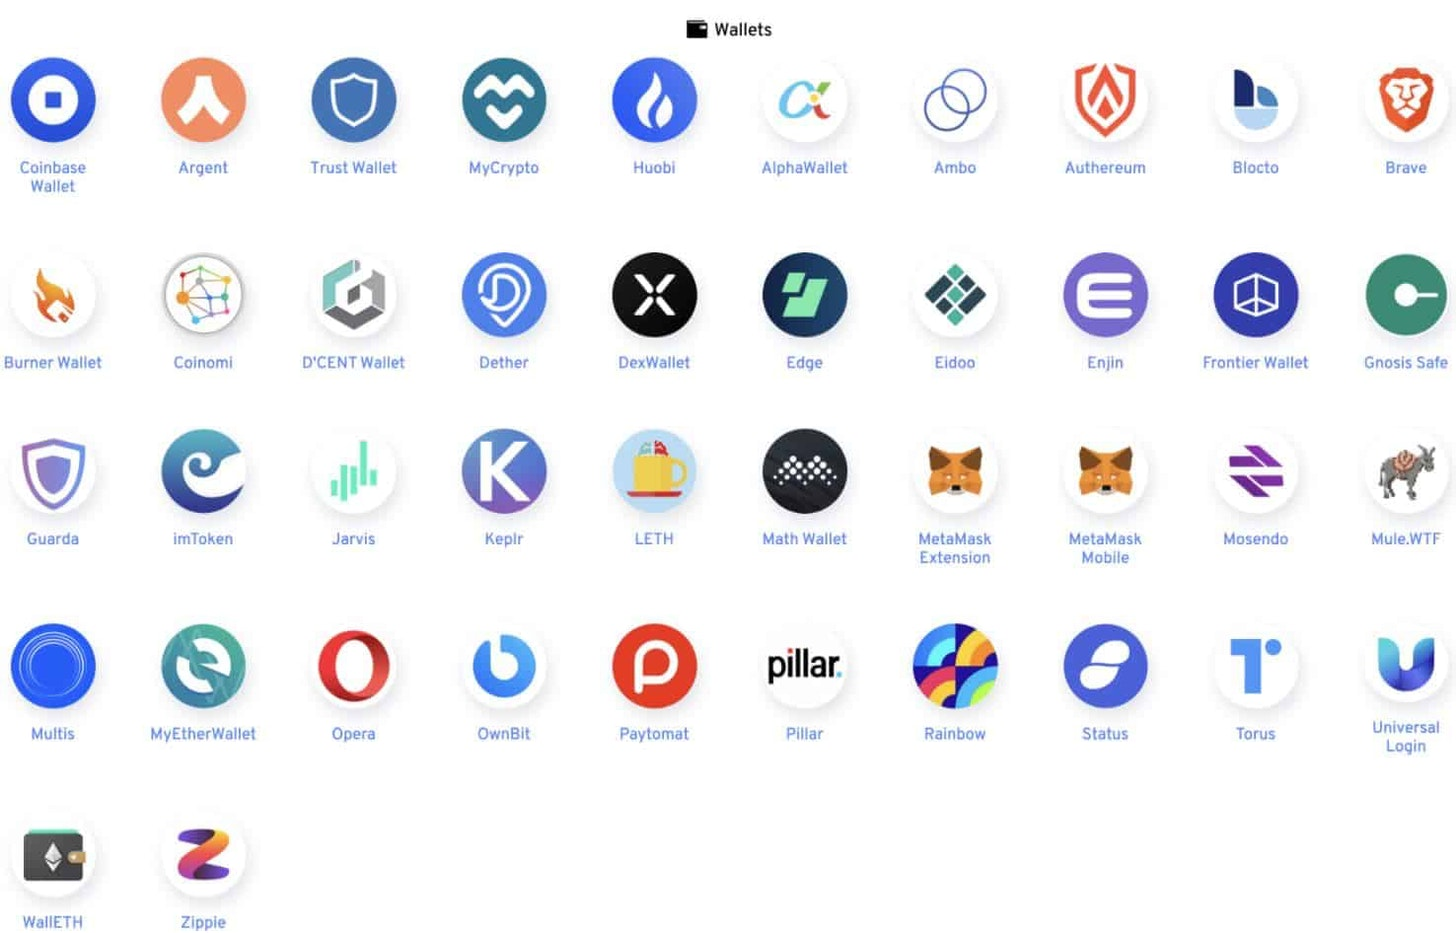 A snapshot of the Ethereum Wallet ecosystem